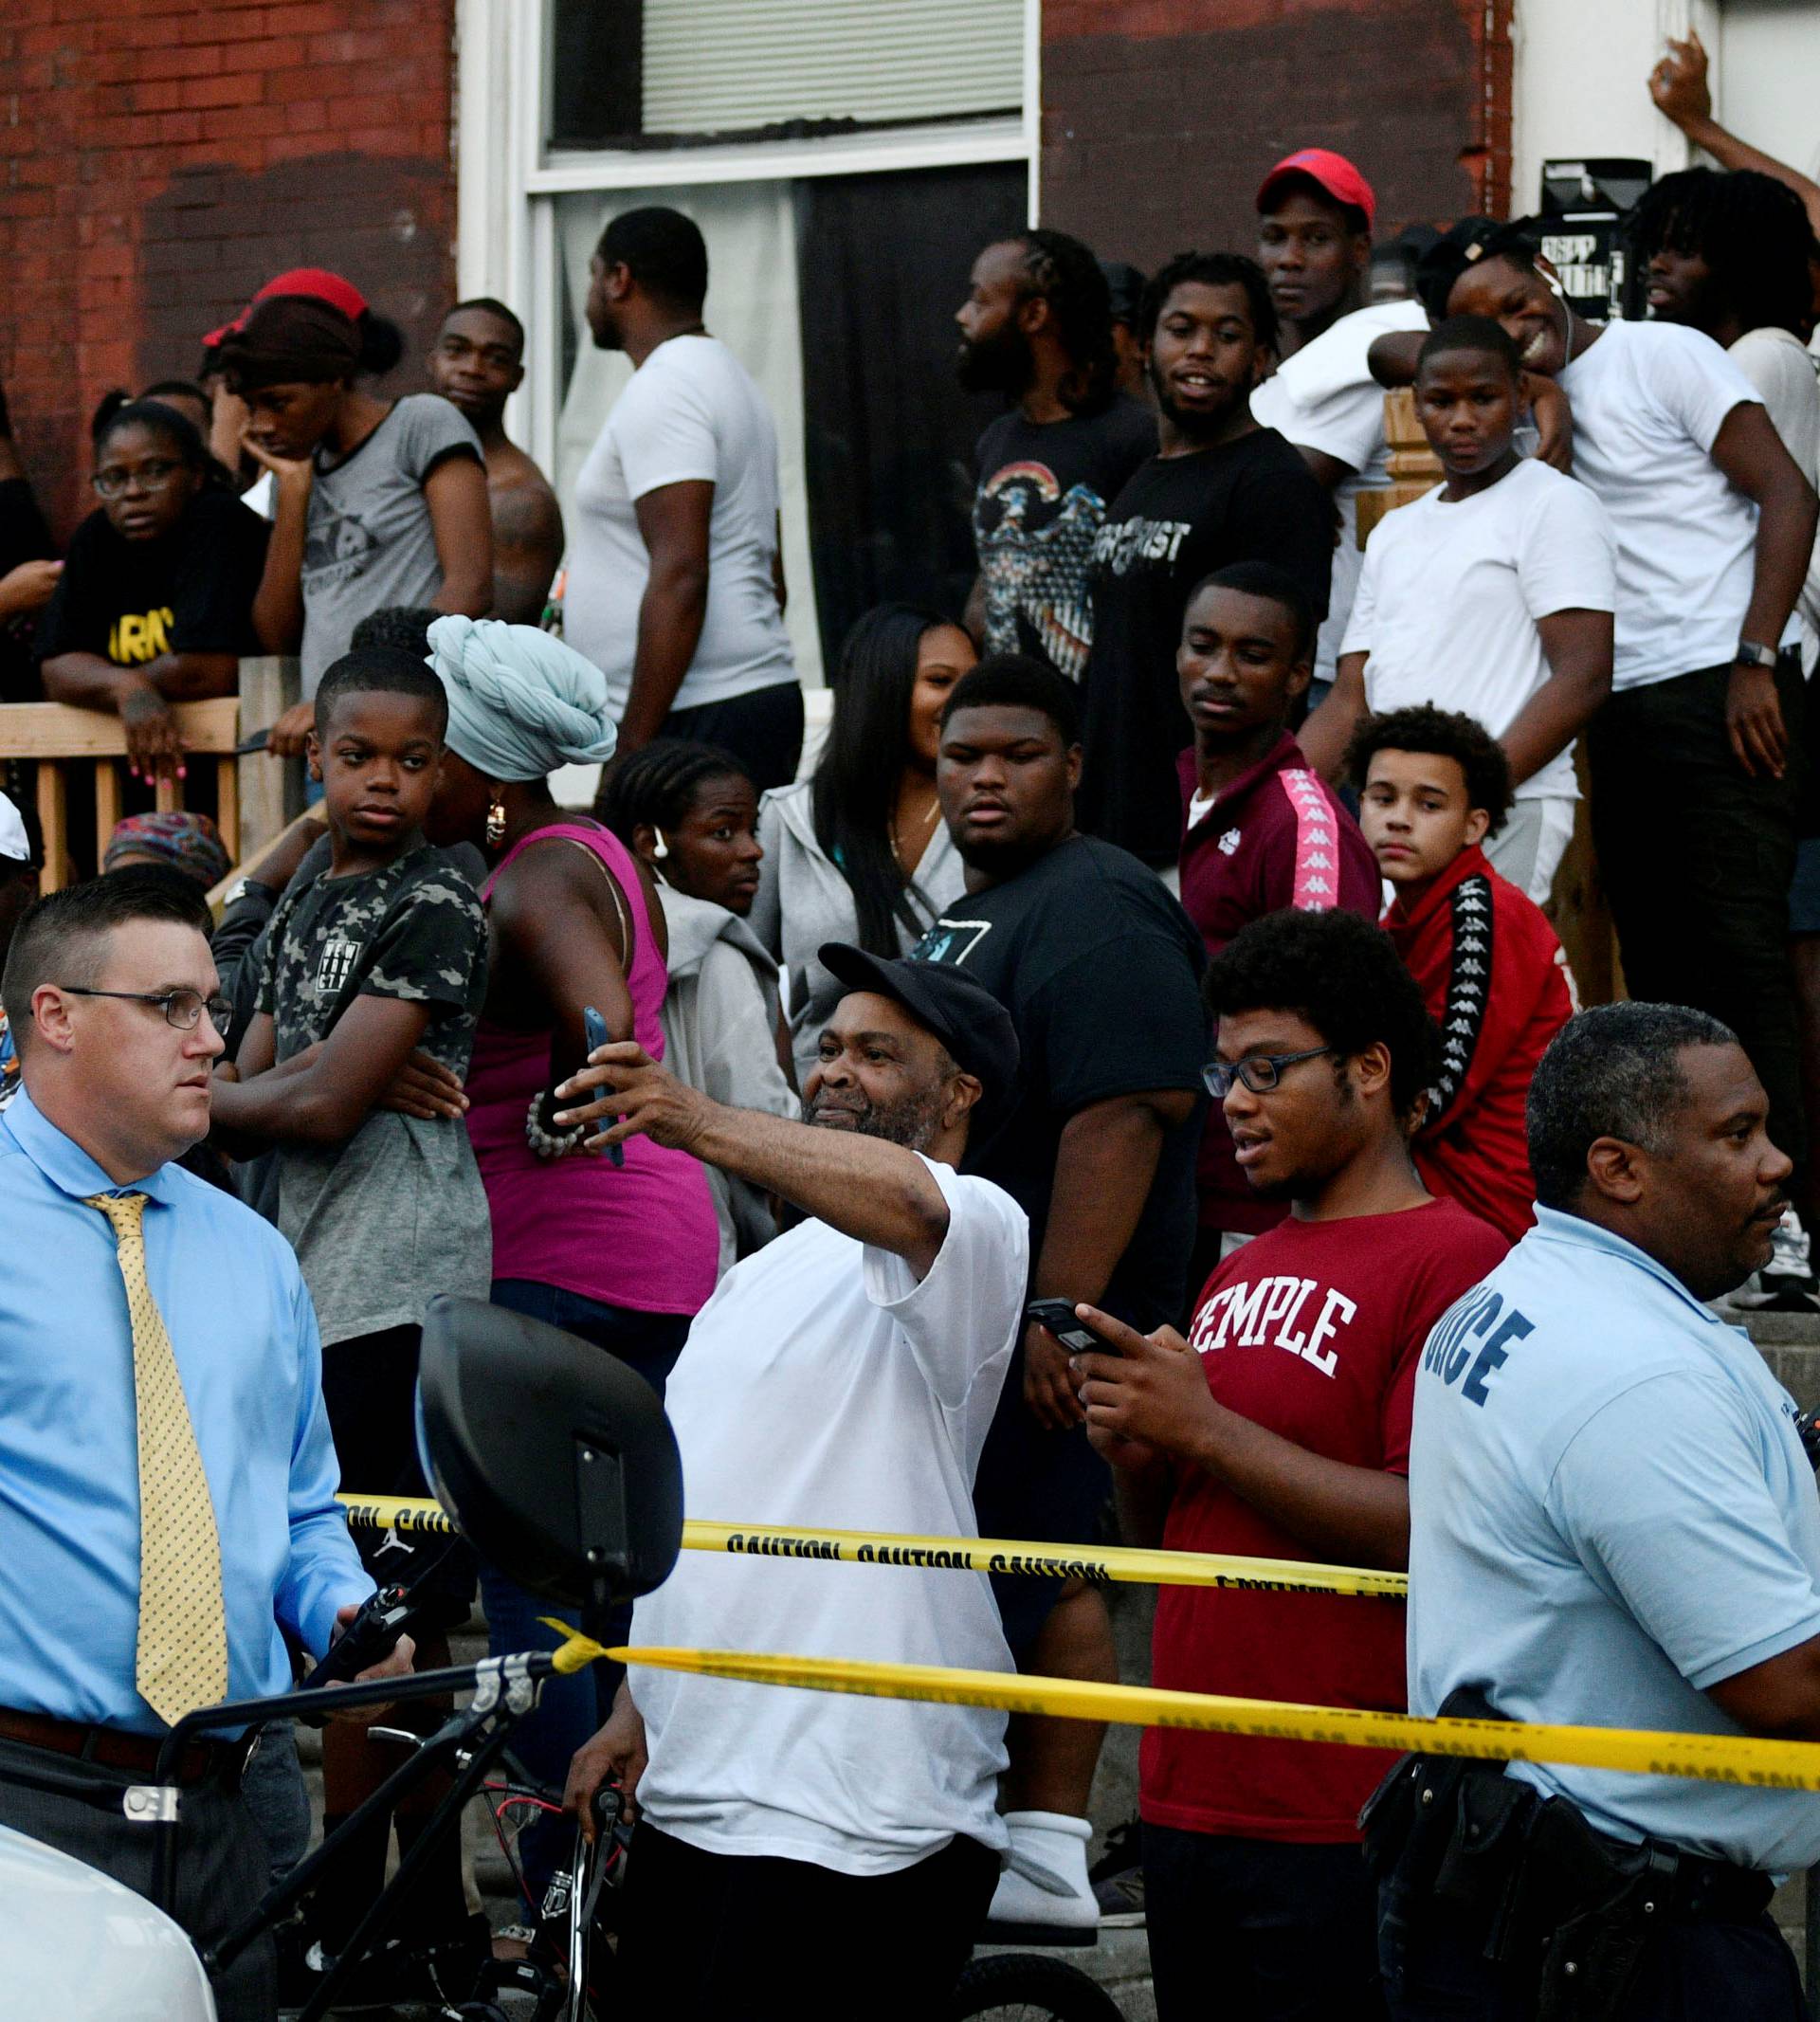 People gather during an active shooter situation in Philadelphia